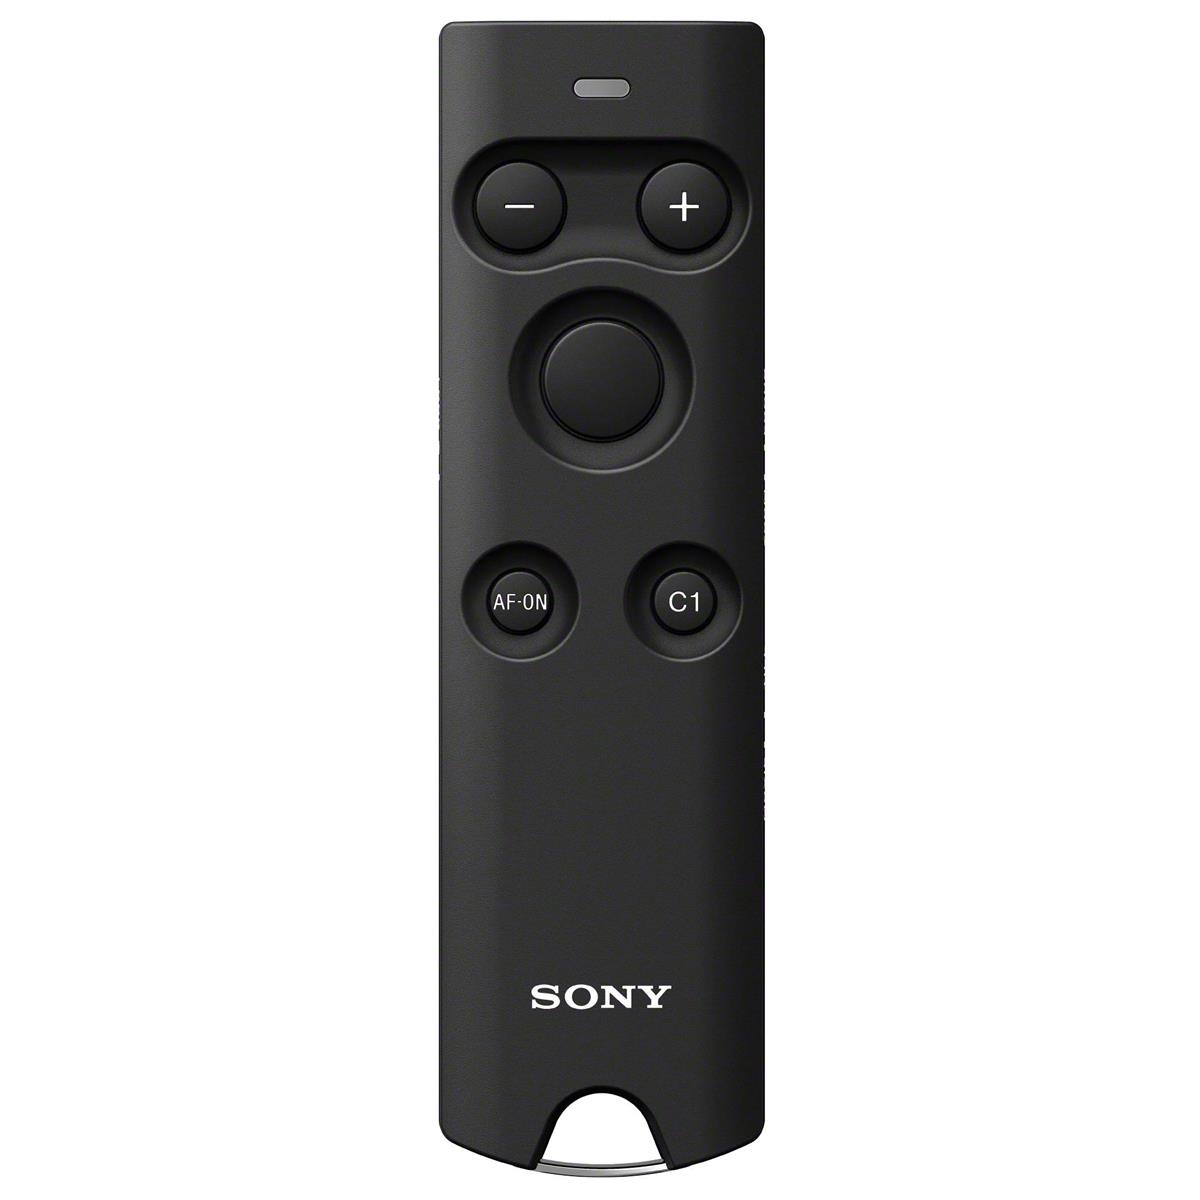 Image of Sony RMT-P1BT Sony Wireless Bluetooth Remote Commander for Digital Cameras